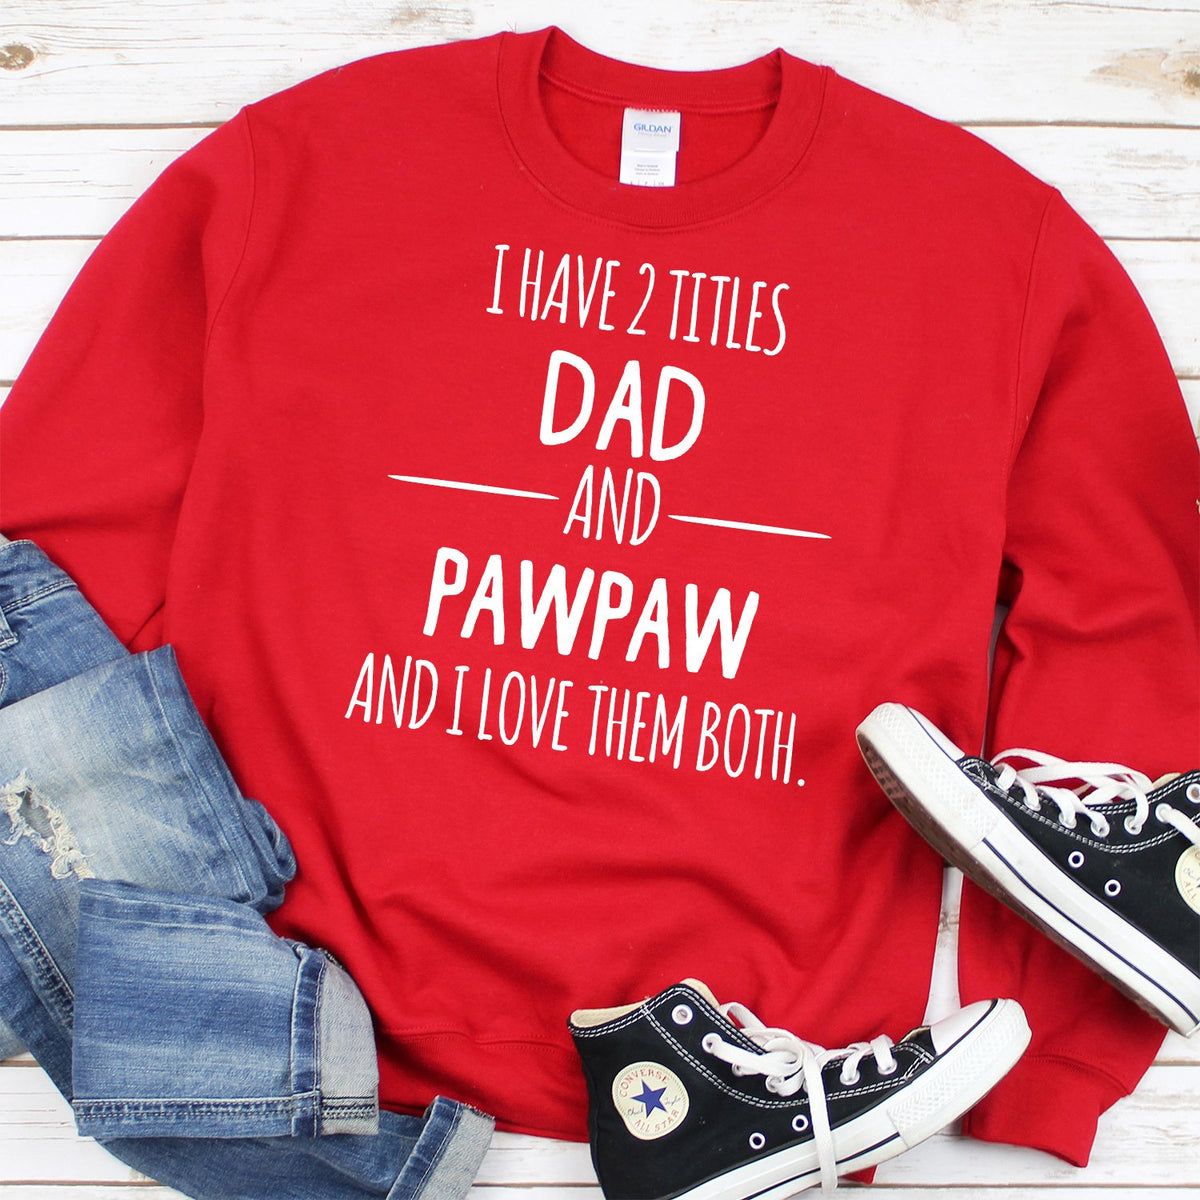 I Have 2 Titles Dad and PawPaw and I Love Them Both - Long Sleeve Heavy Crewneck Sweatshirt